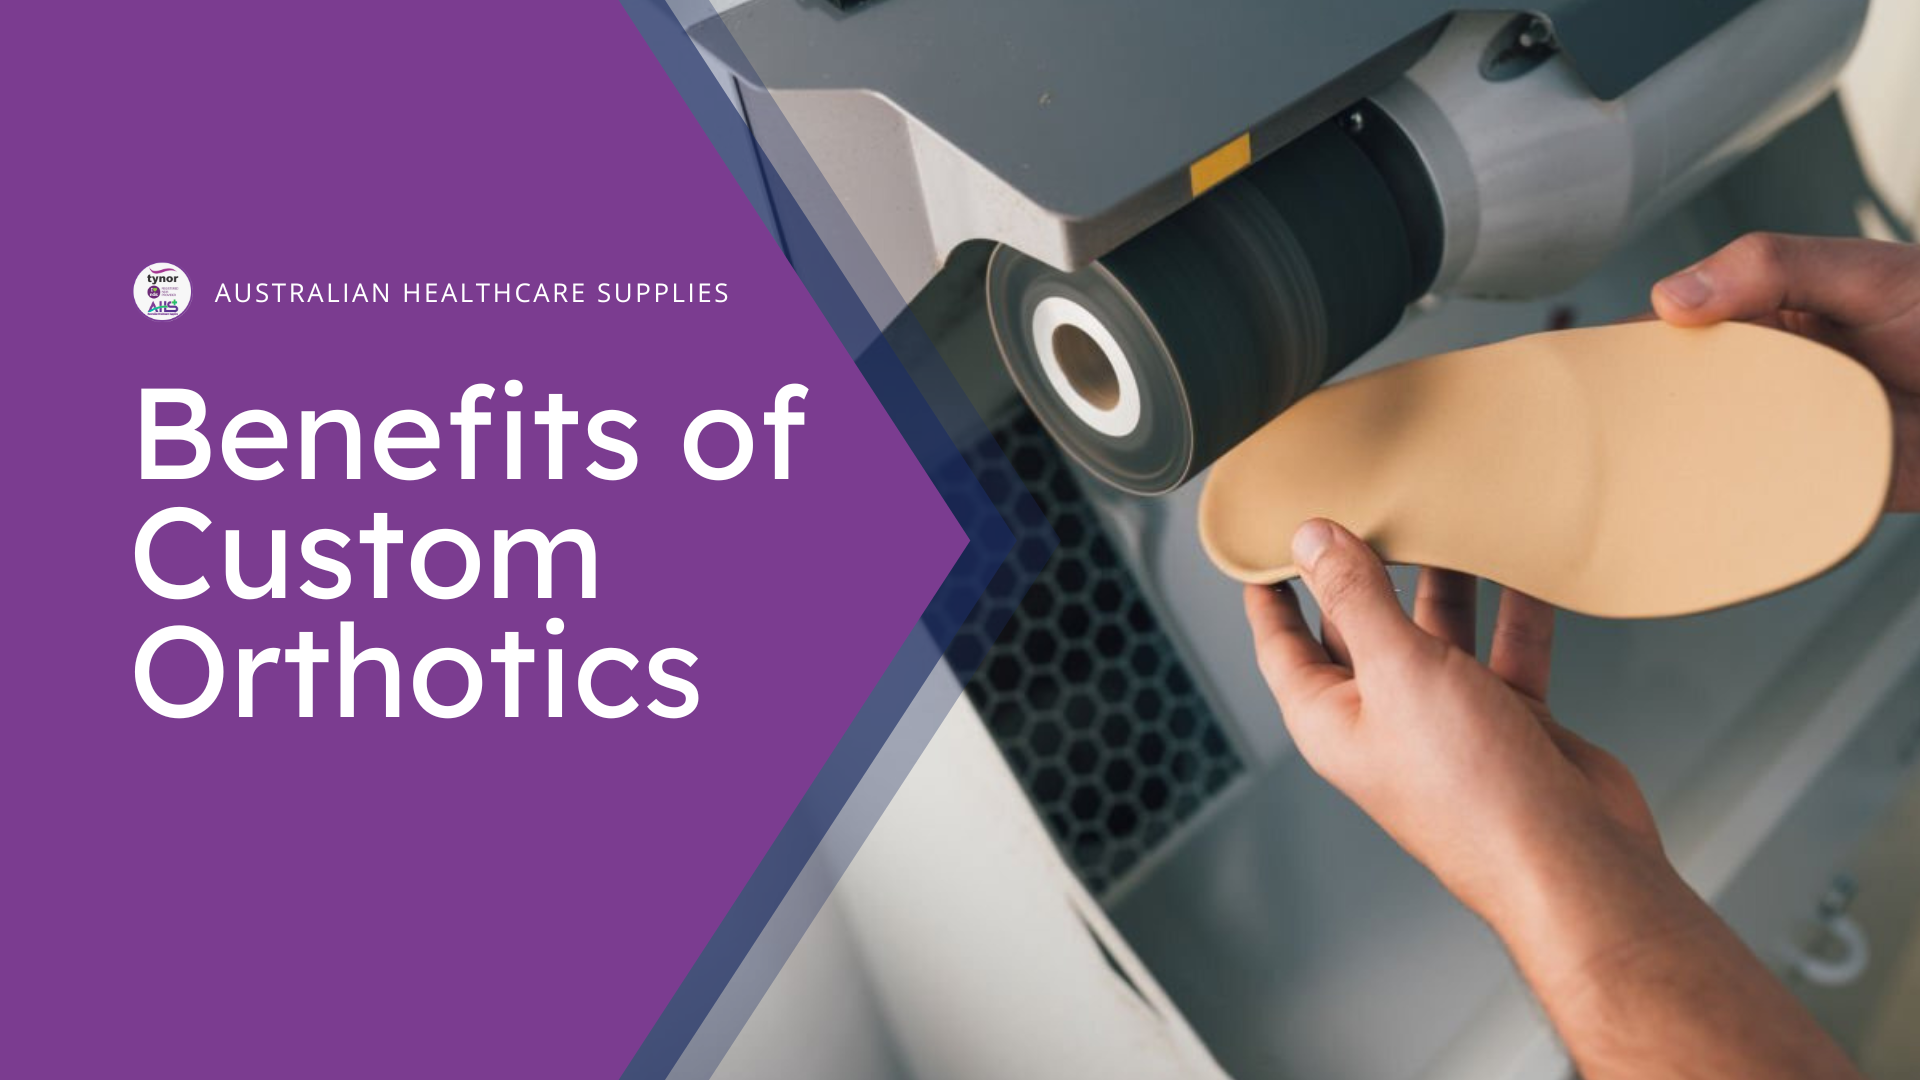 What Are The Benefits of Custom Orthotics?